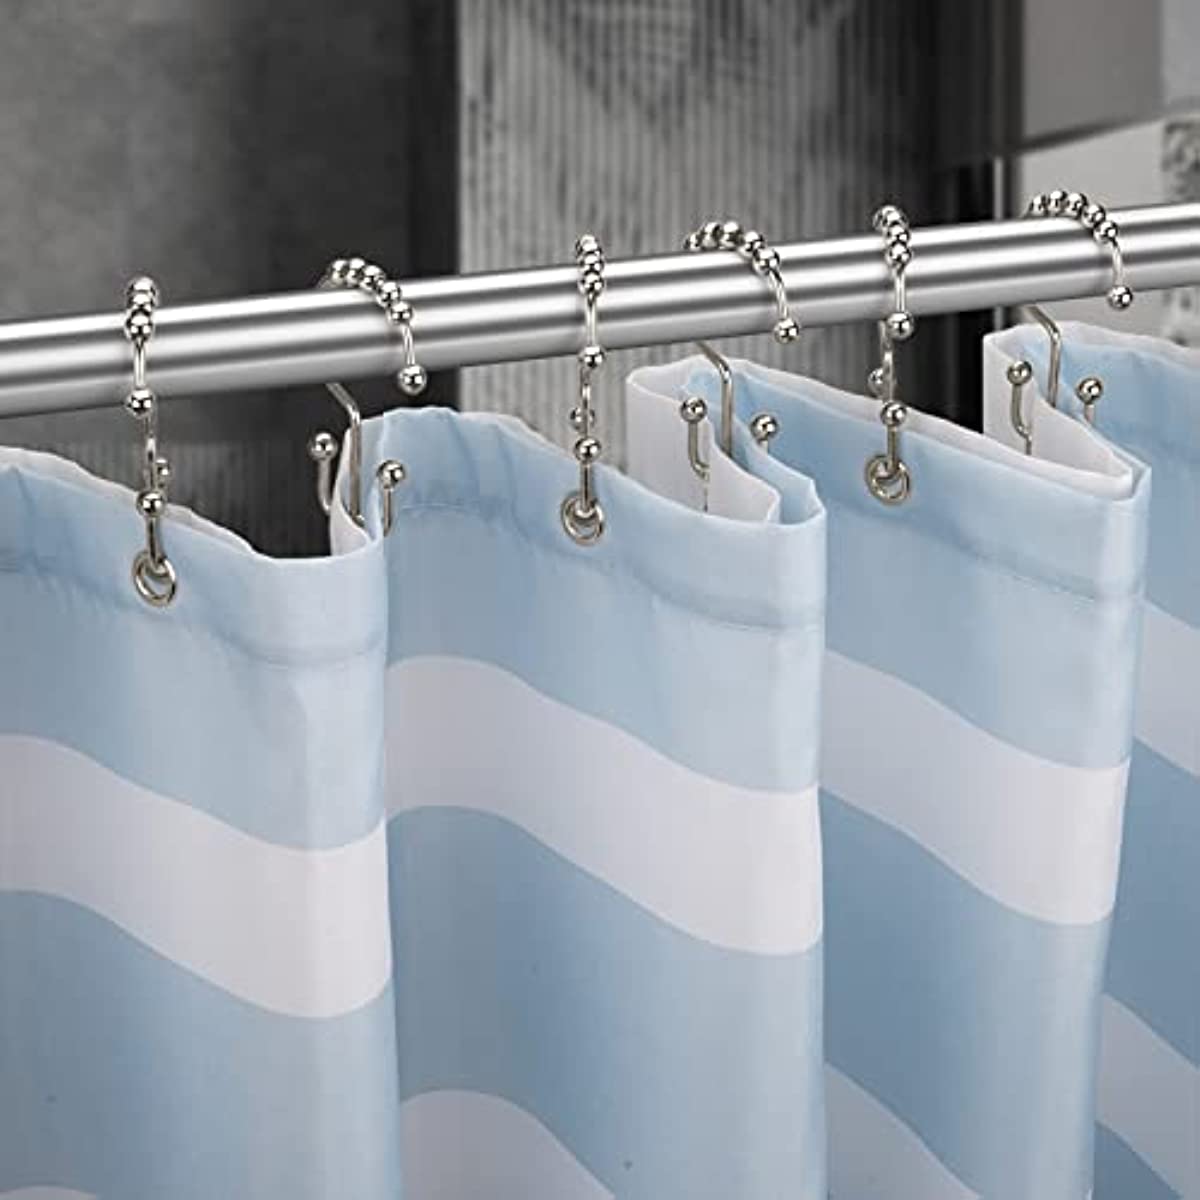 Shower Curtain Rings, Durable Rust-Resistant Metal Shower Curtain Hooks for  room Shower Rod - Set of 12, Chrome 